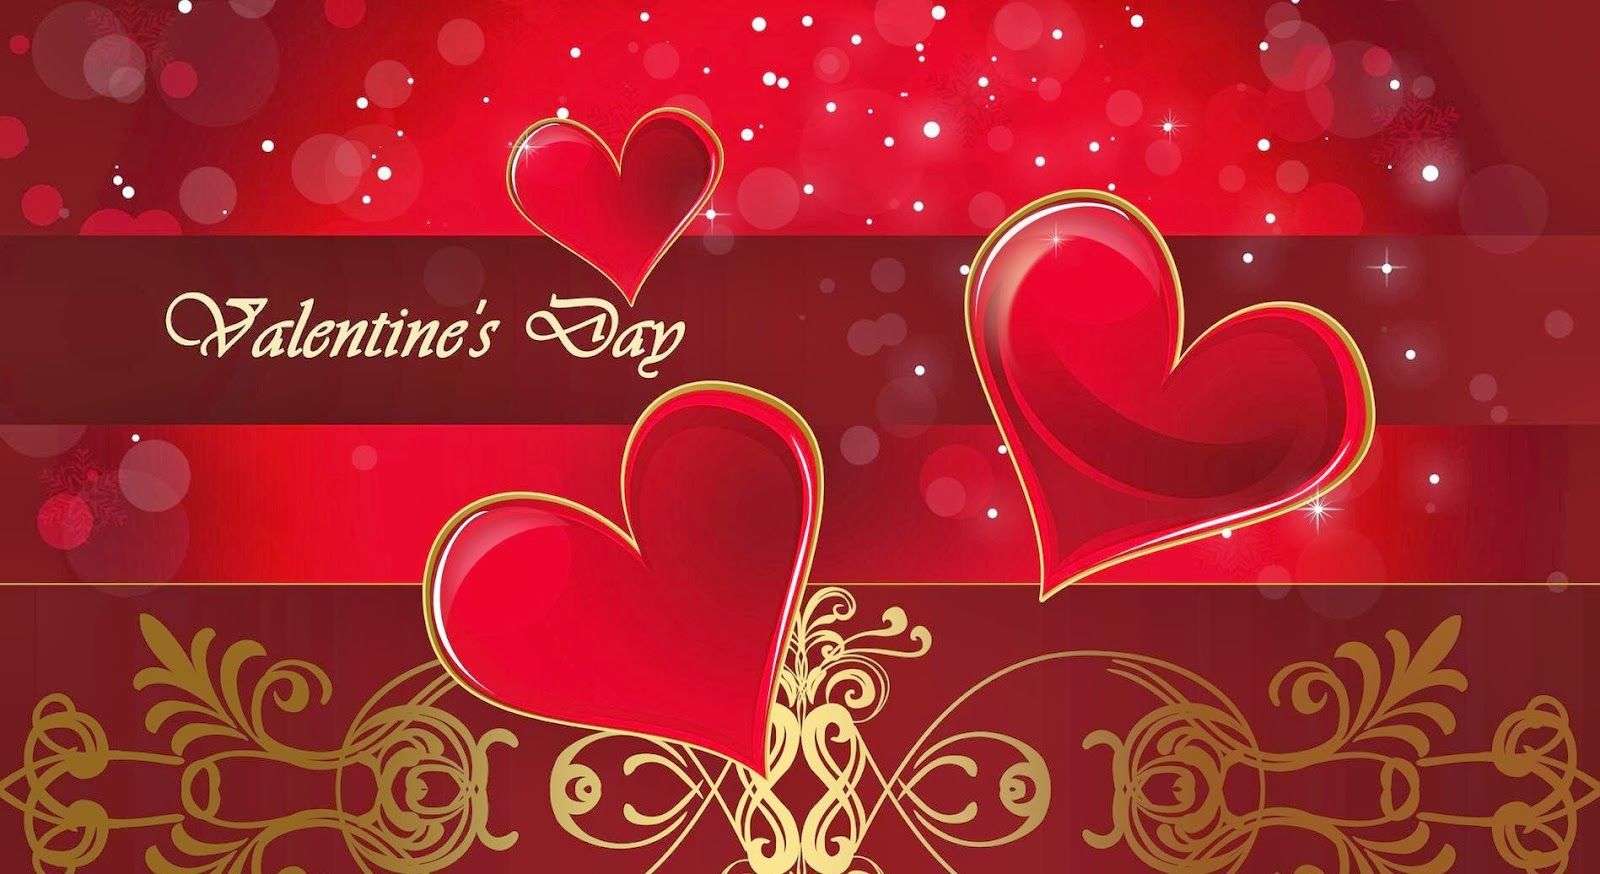 Wish You Happy Valentine S Day HD Wallpaper Image Photos For